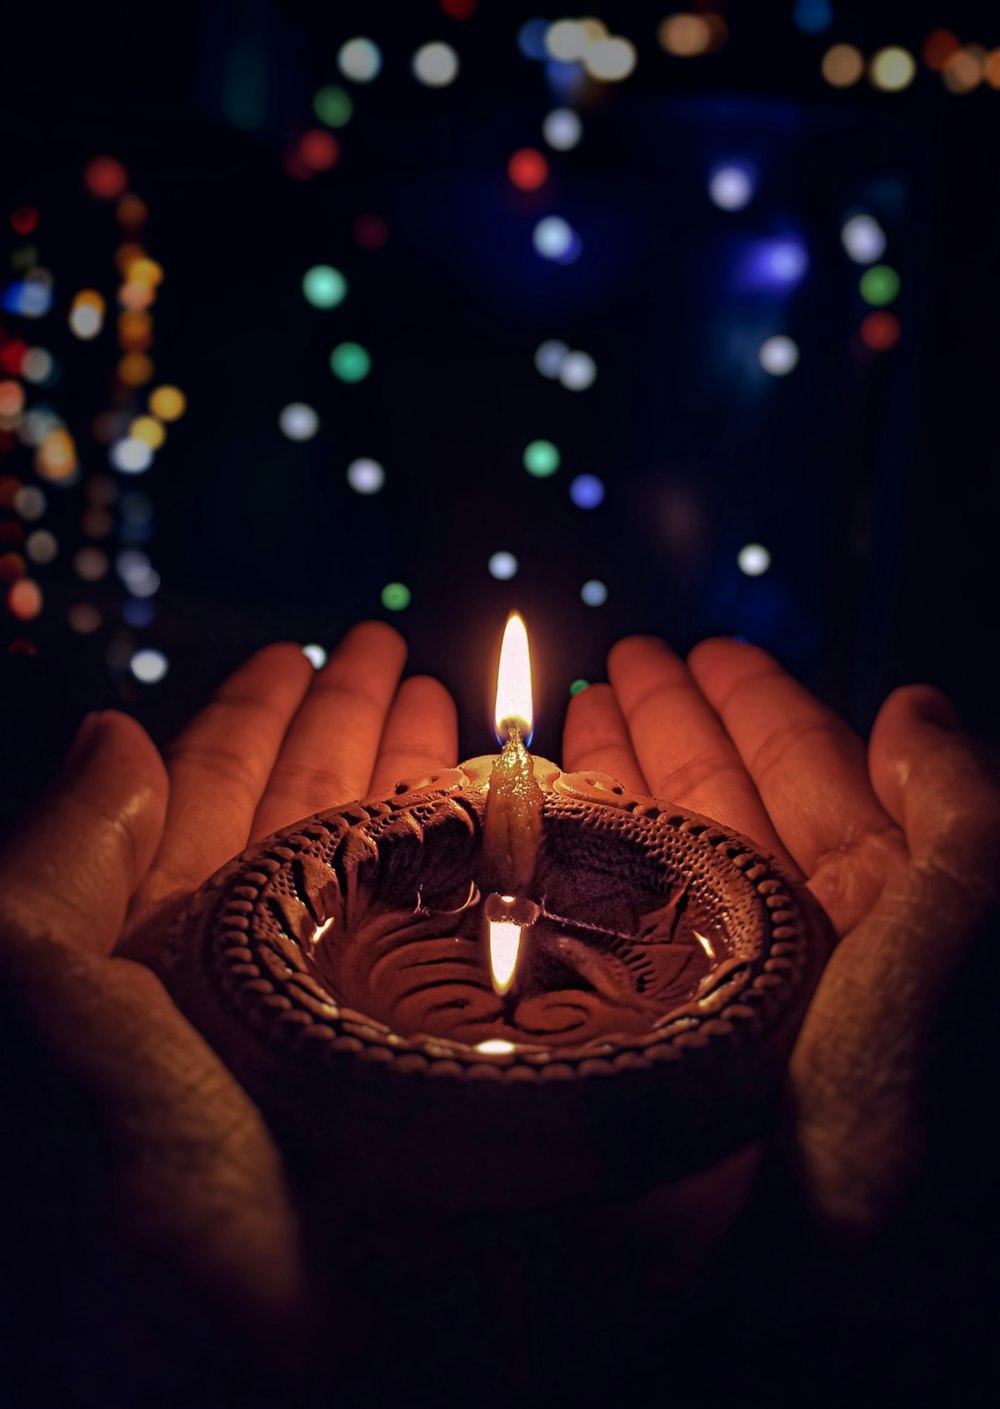 Happy Diwali Pictures | Download Free Images on Unsplash